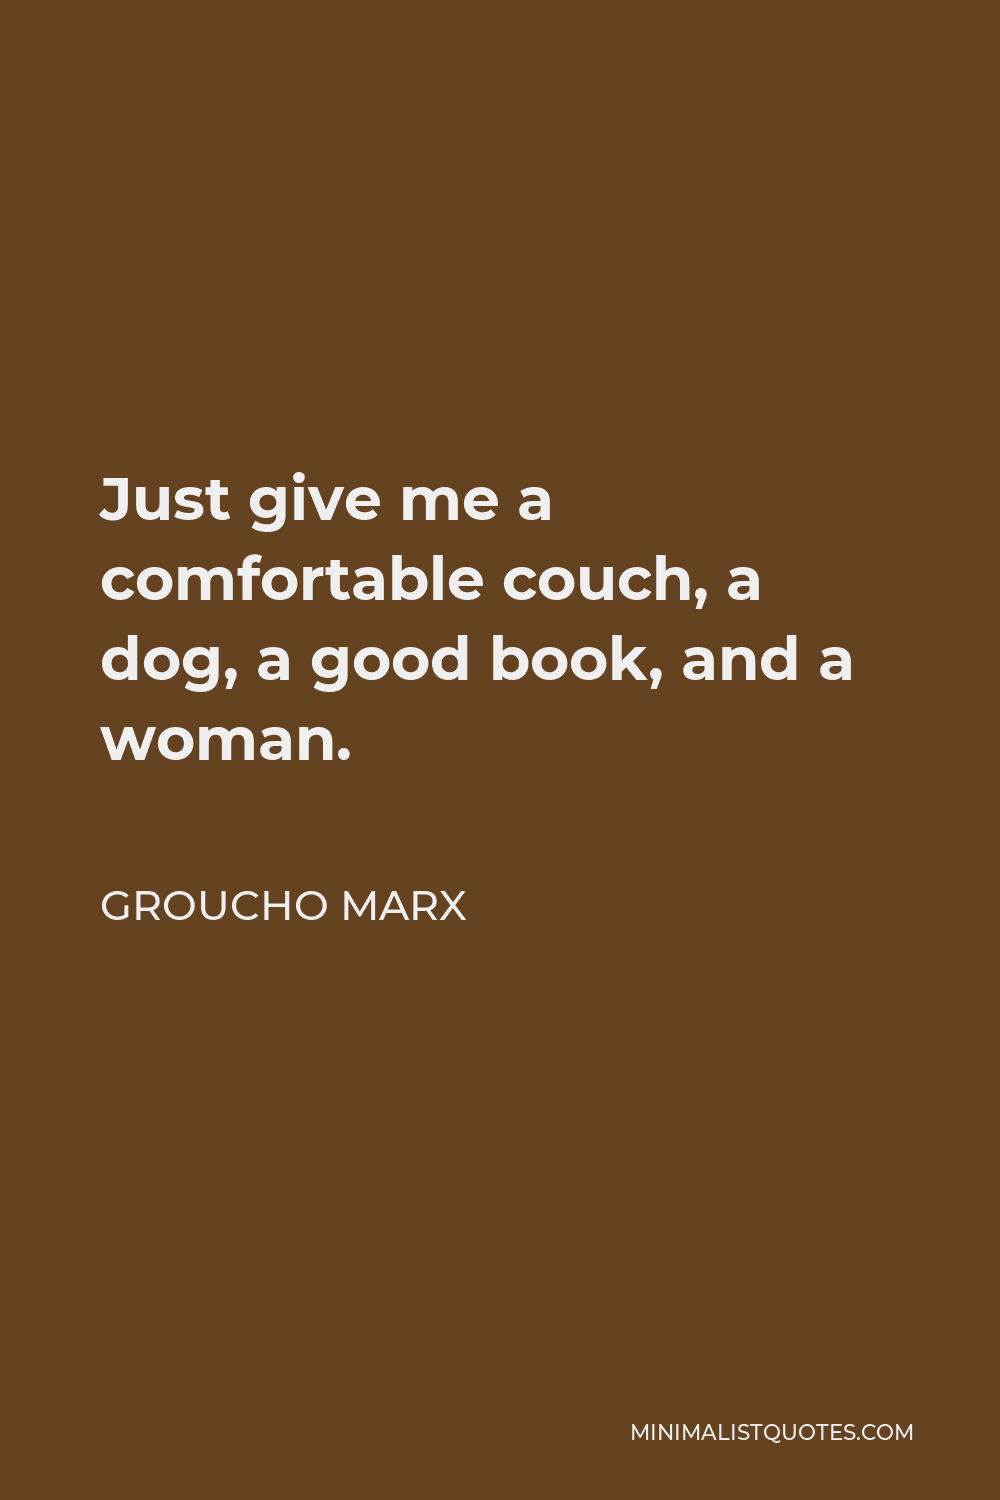 Groucho Marx Quote - Just give me a comfortable couch, a dog, a good book, and a woman.